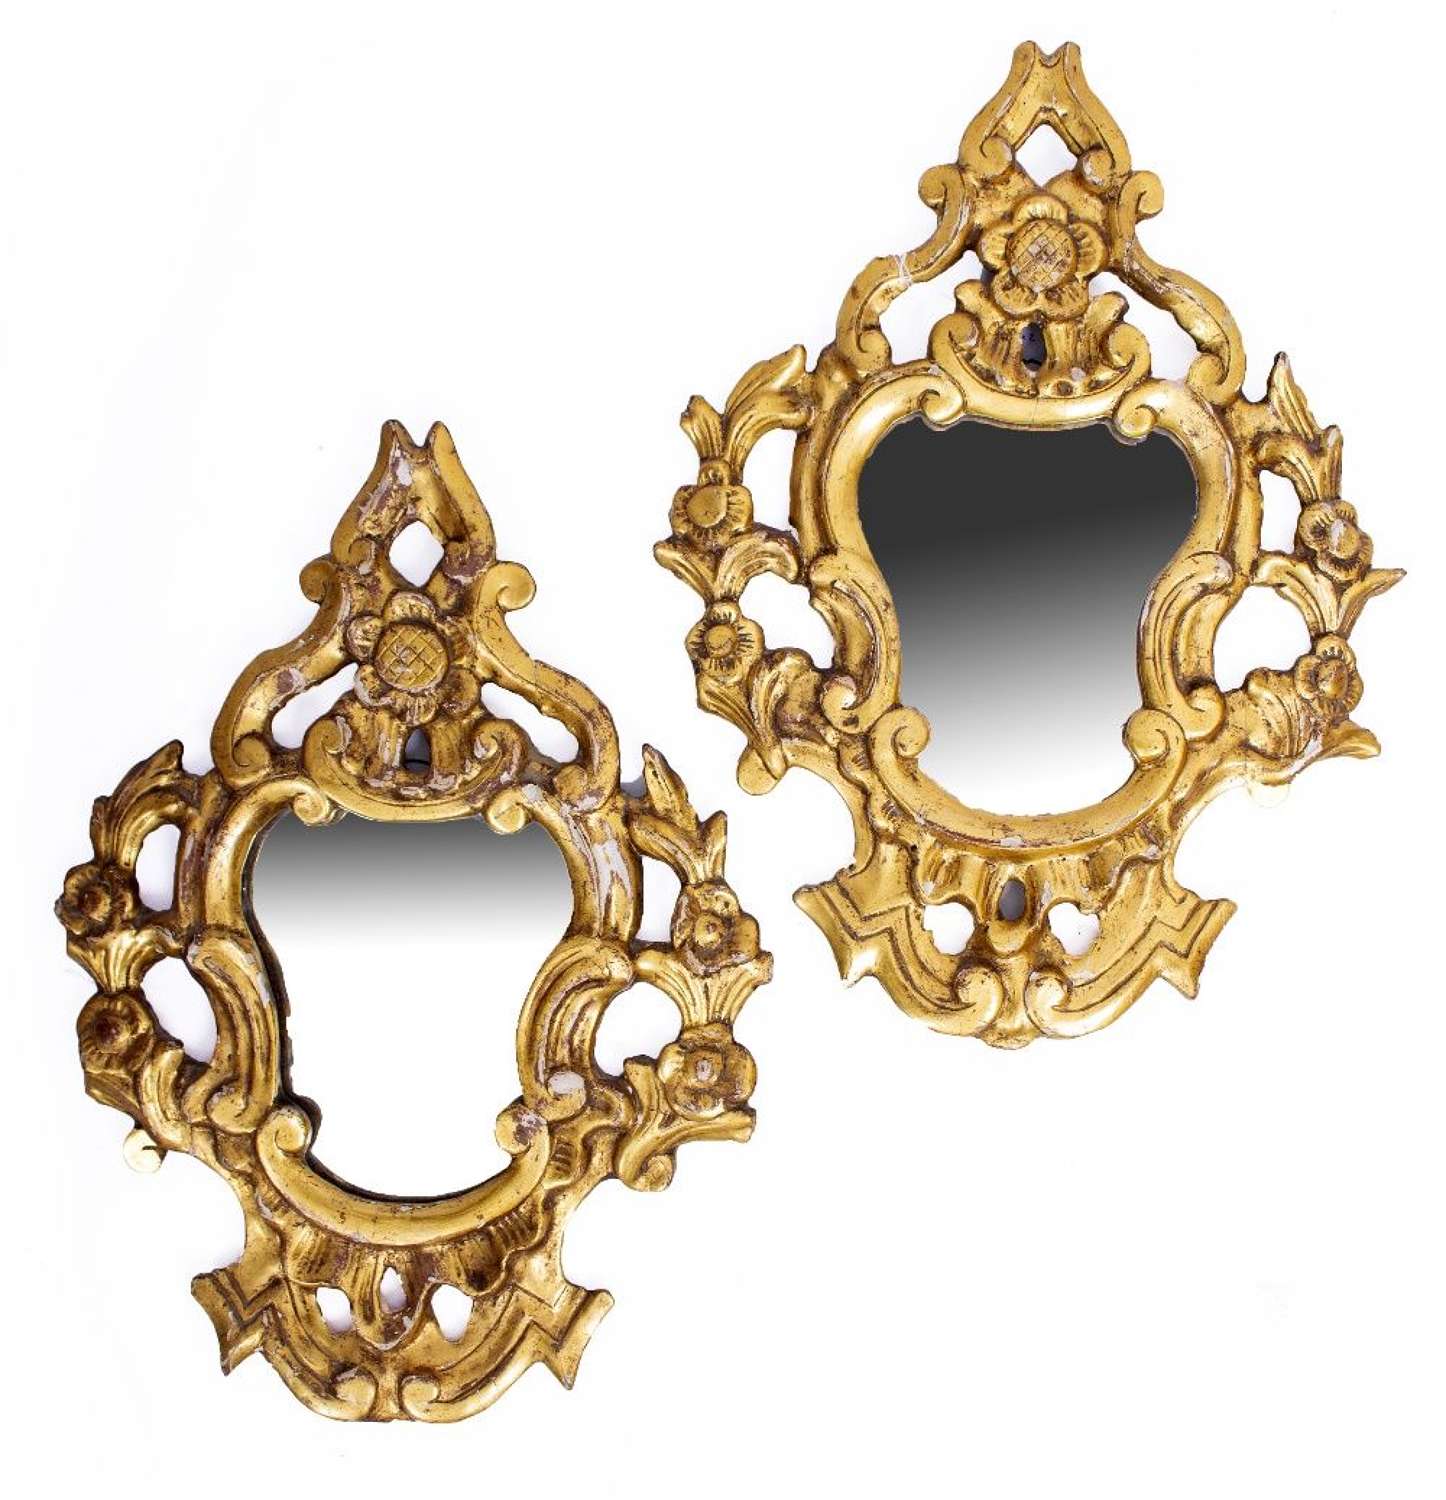 A Pair of Framed Antique Gilt Mirrors